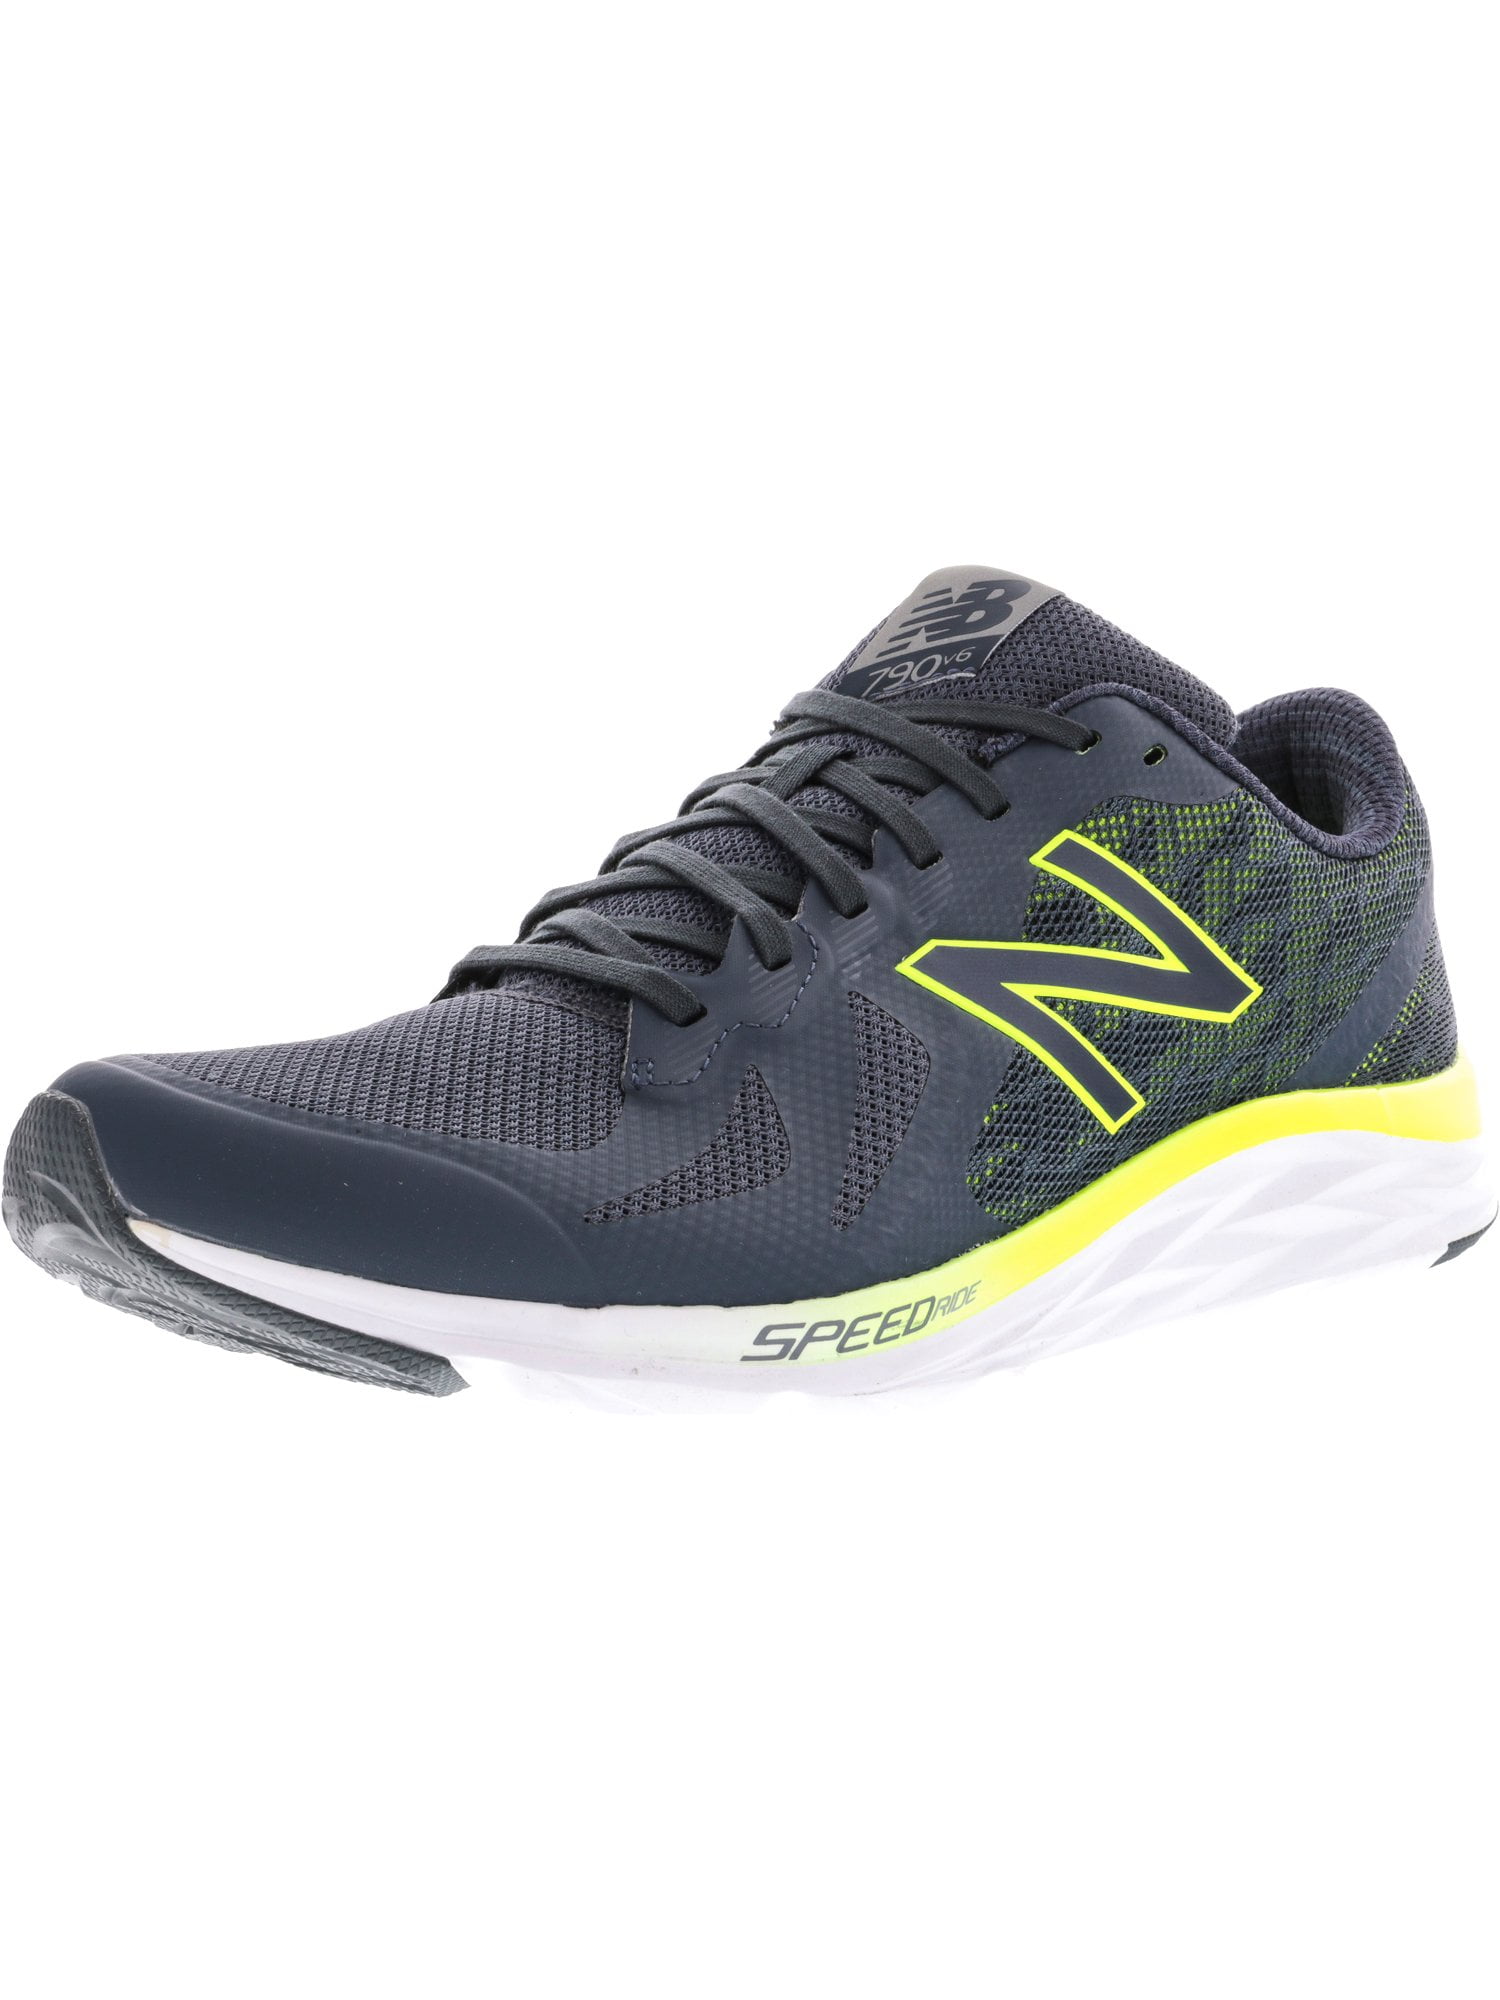 new balance m790 review